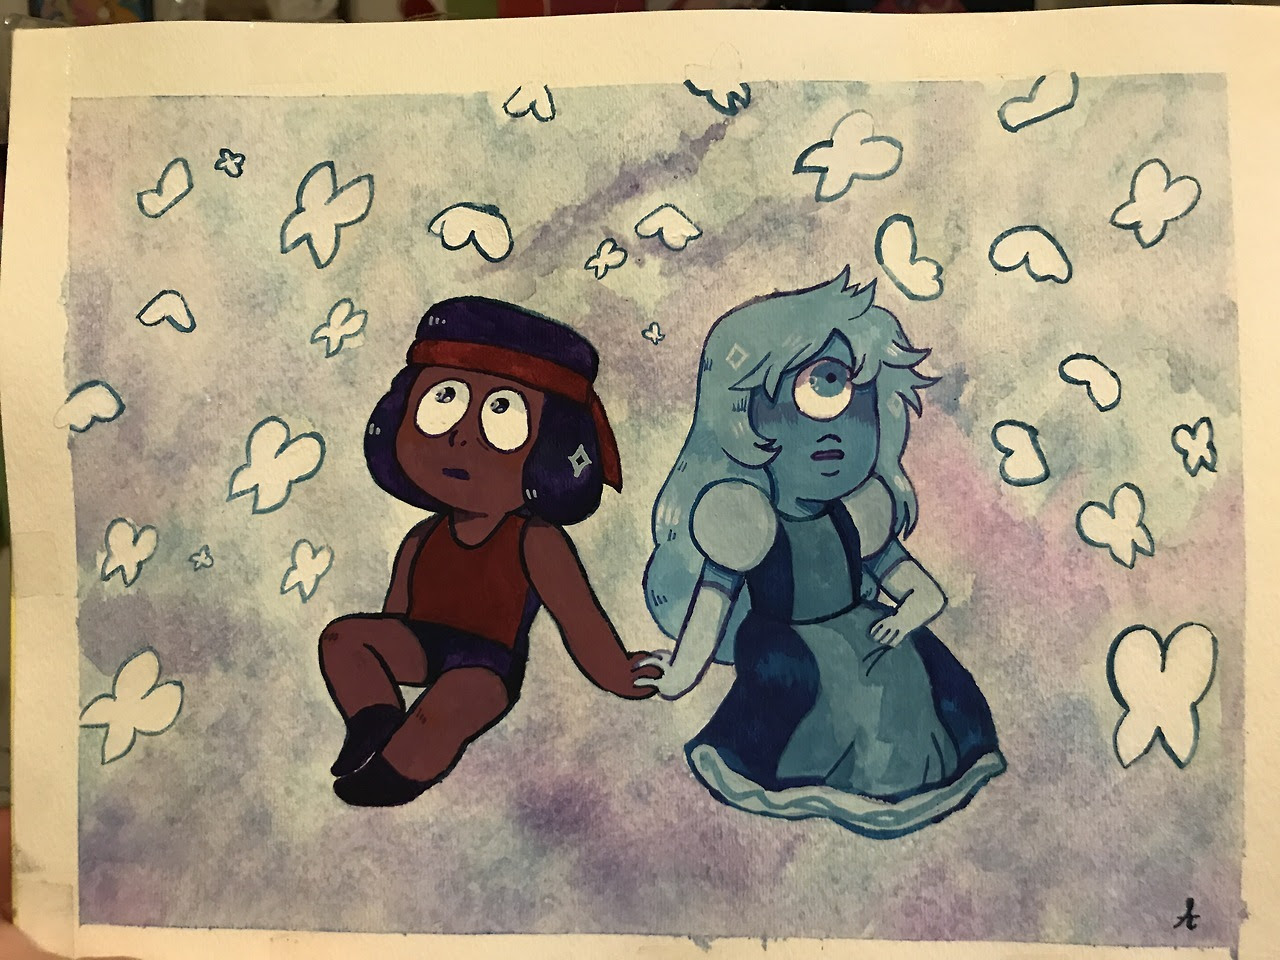 My cousin asked me to make her some su art for Christmas